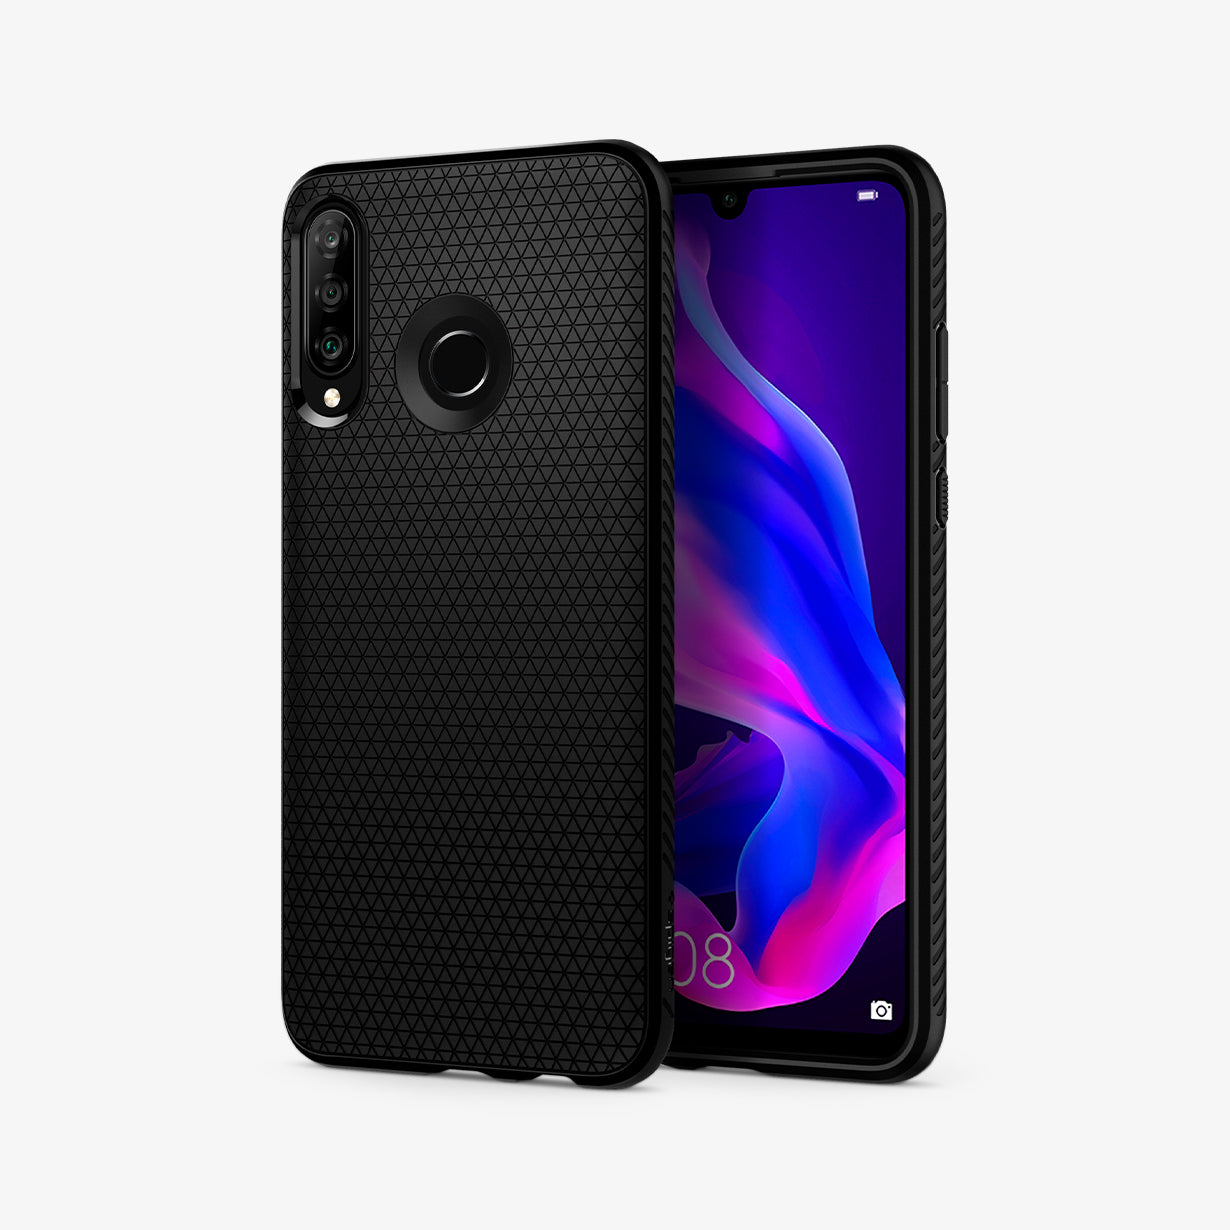 L39CS25738 - Huawei P30 Lite / Nova 4e Case Liquid Air in black showing the back and front